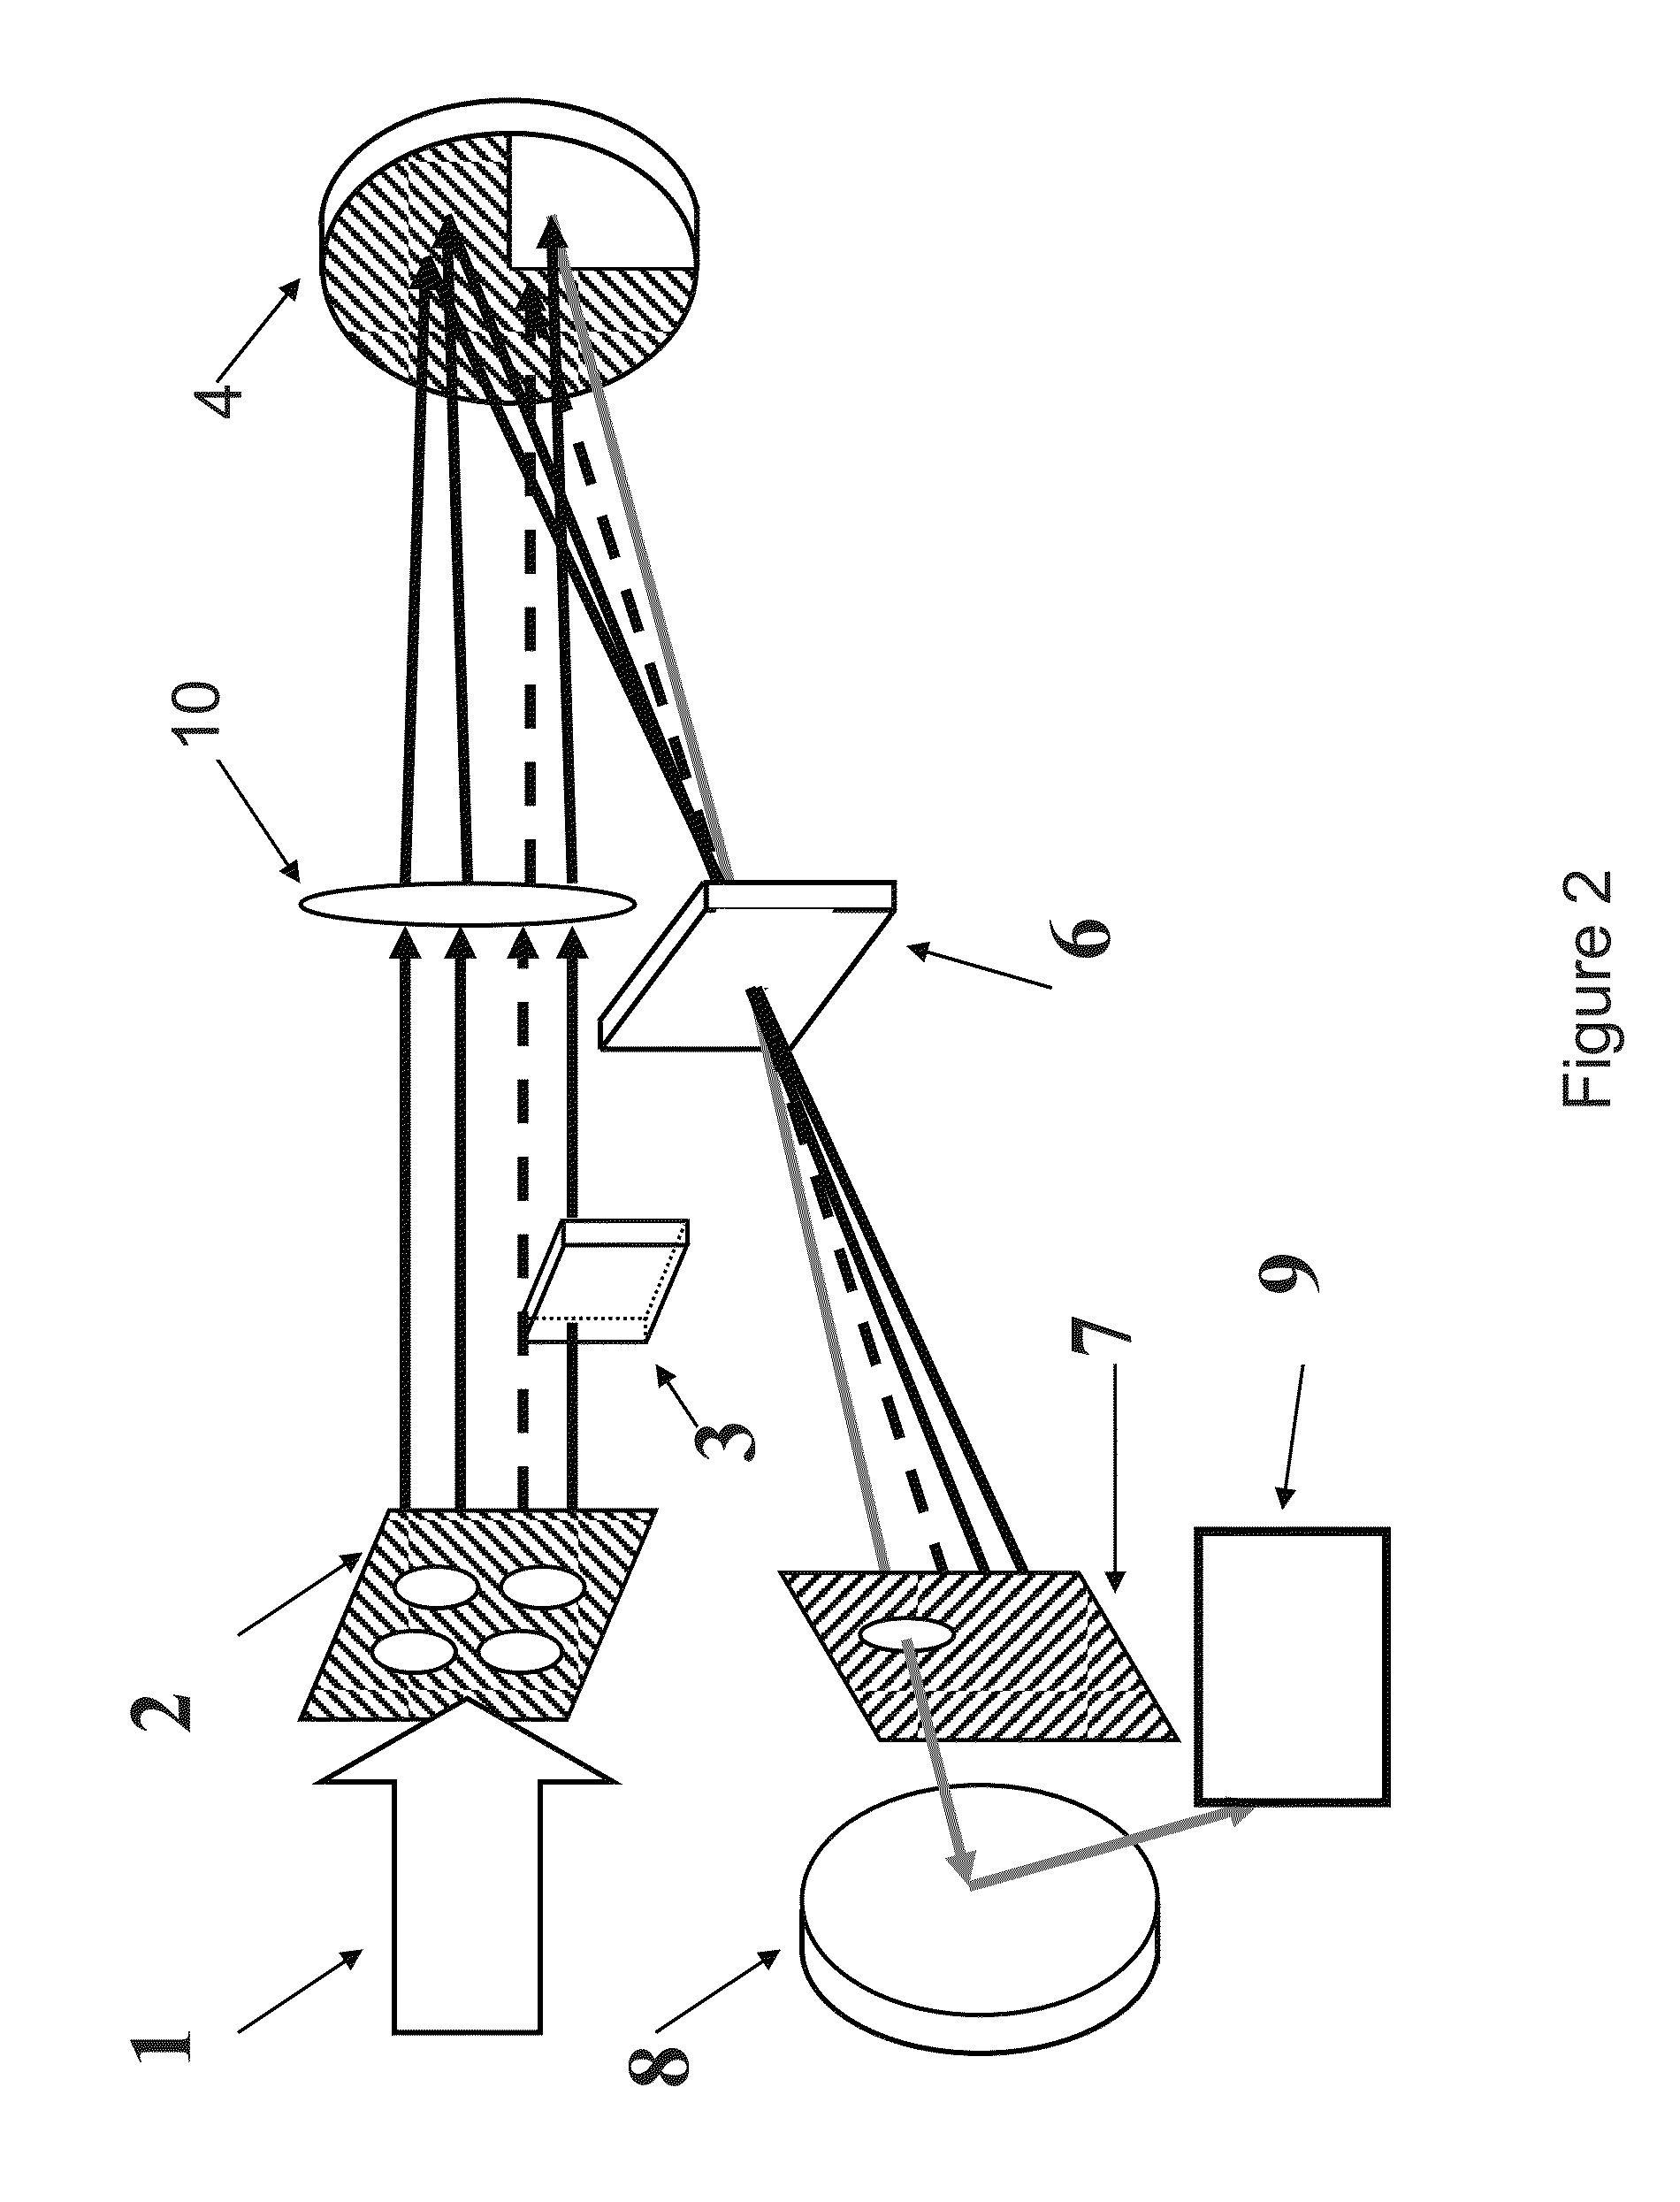 Method and apparatus for femtosecond laser pulse measurement based on transient-grating effect